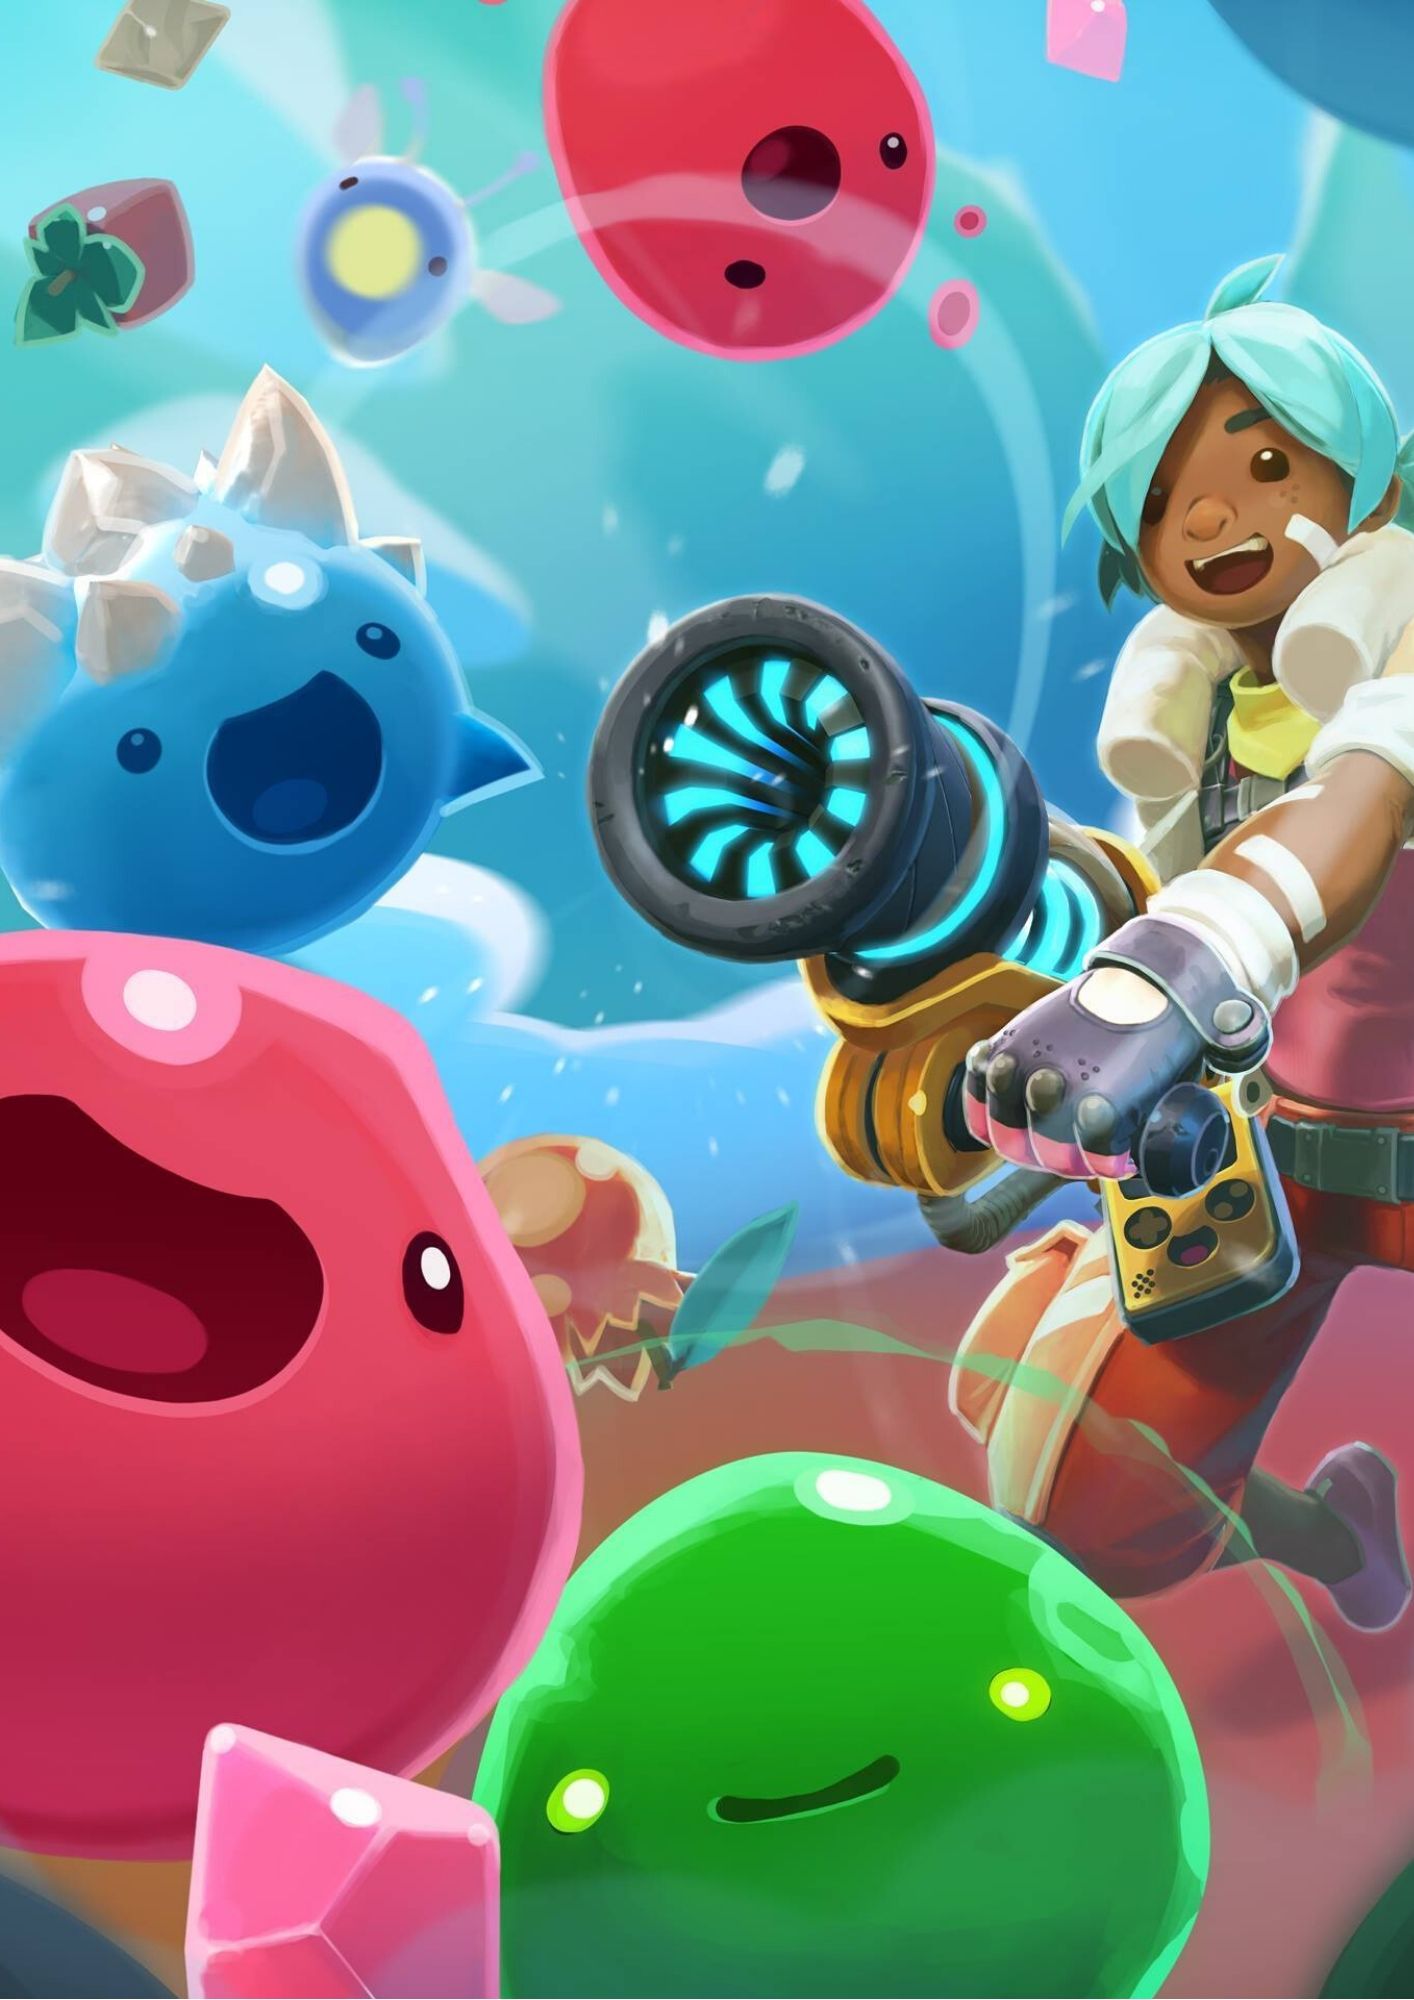 Slime Rancher - Deluxe Edition